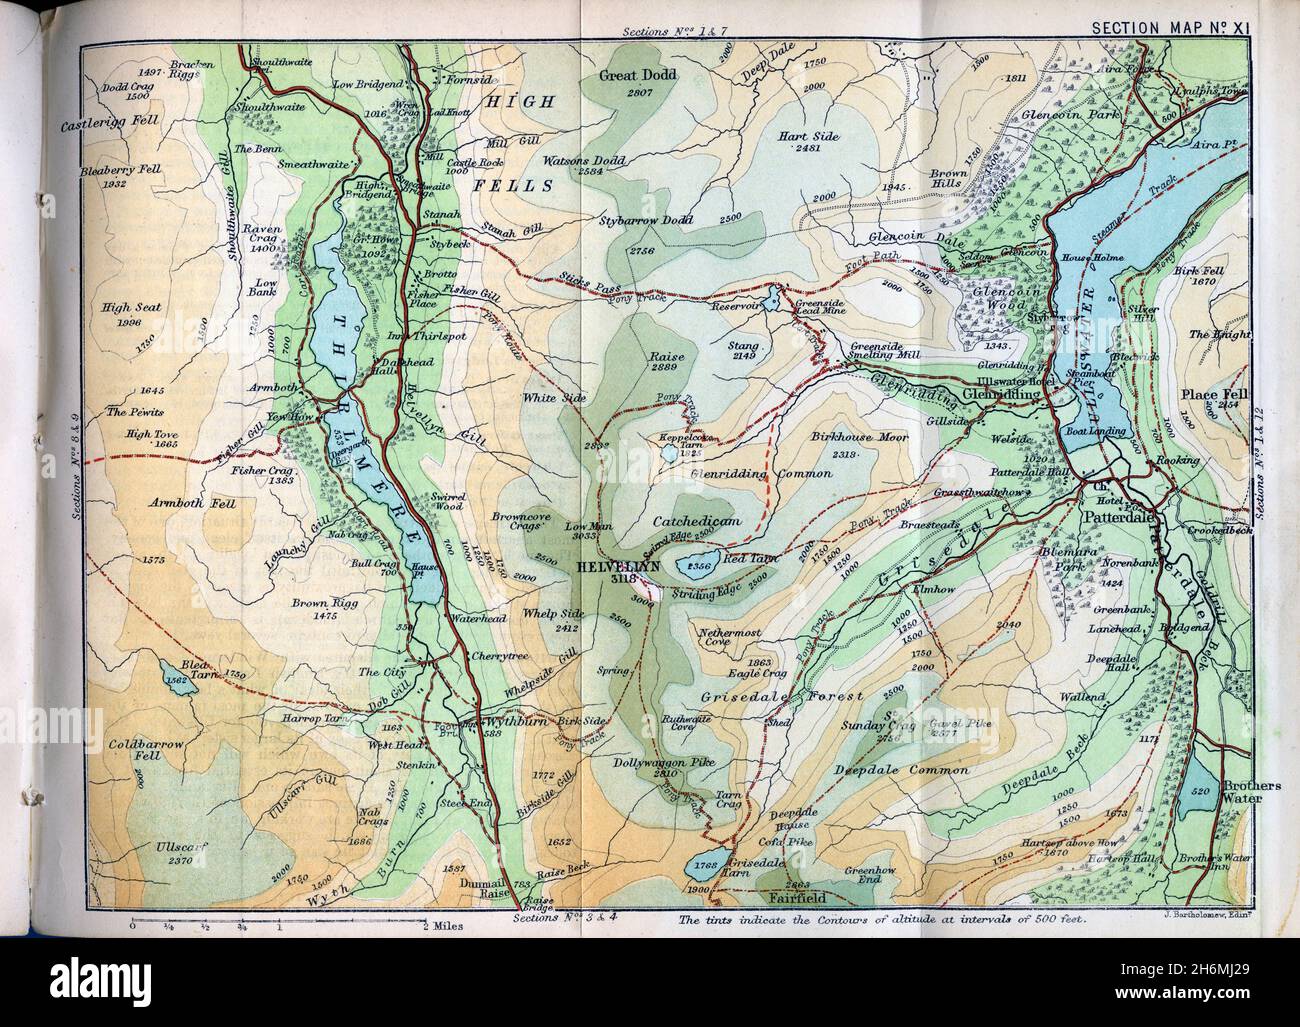 Fold-out map (shown unfolded) featuring Thirlmere and Ullswater, from a Baddeley's Thorough Guide to the English Lake District, published in 1889 Stock Photo